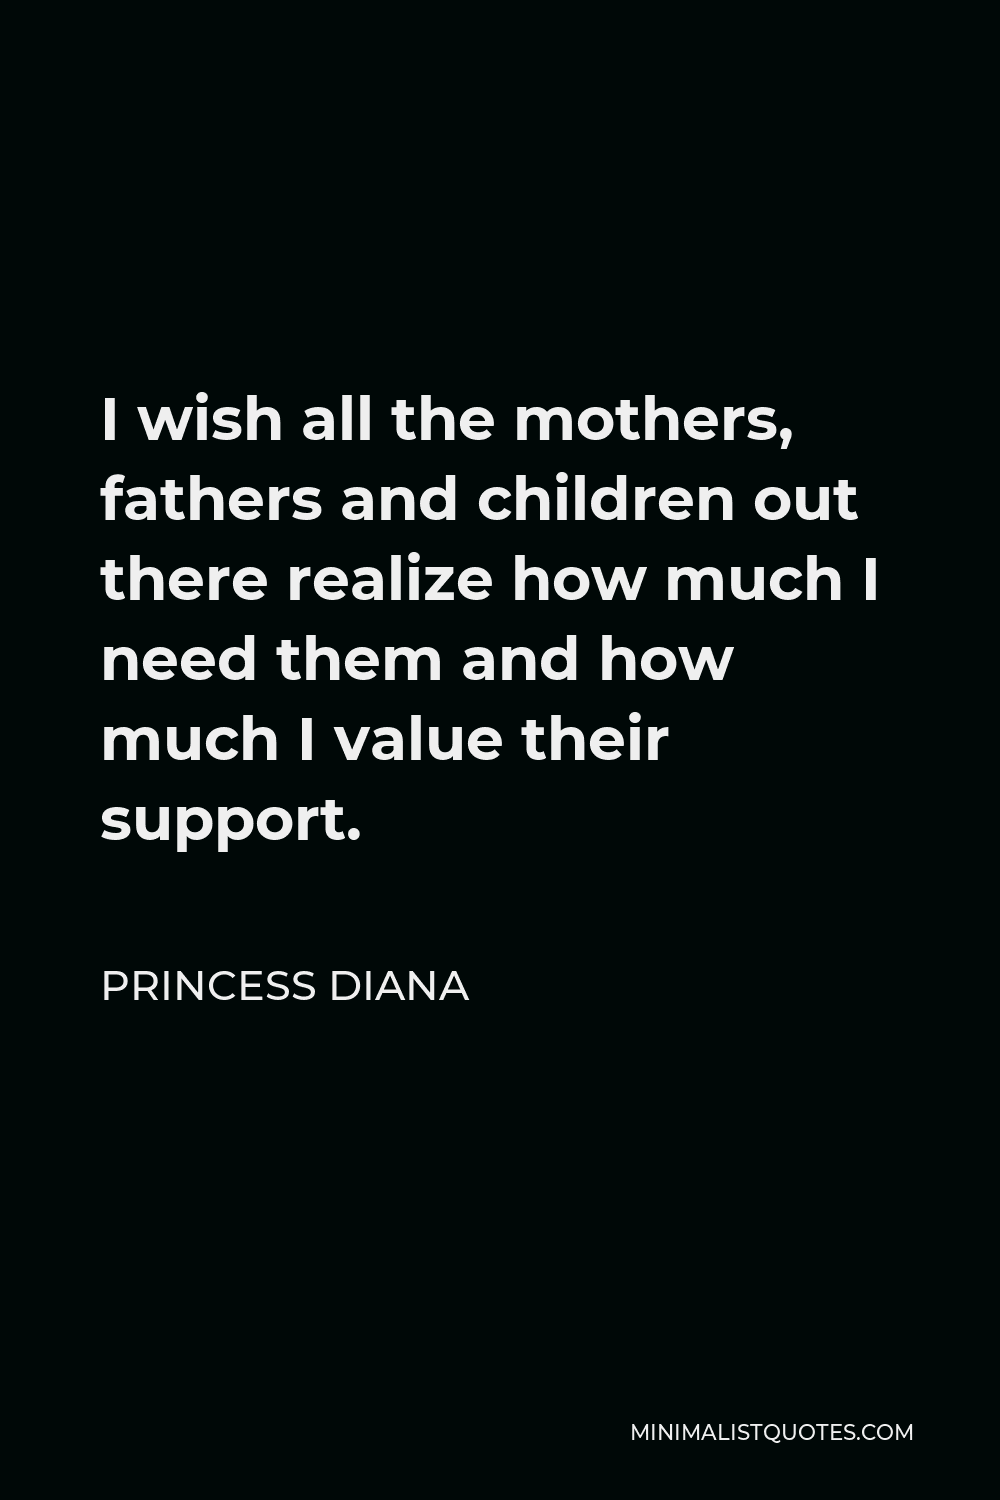 Princess Diana Quote - I wish all the mothers, fathers and children out there realize how much I need them and how much I value their support.